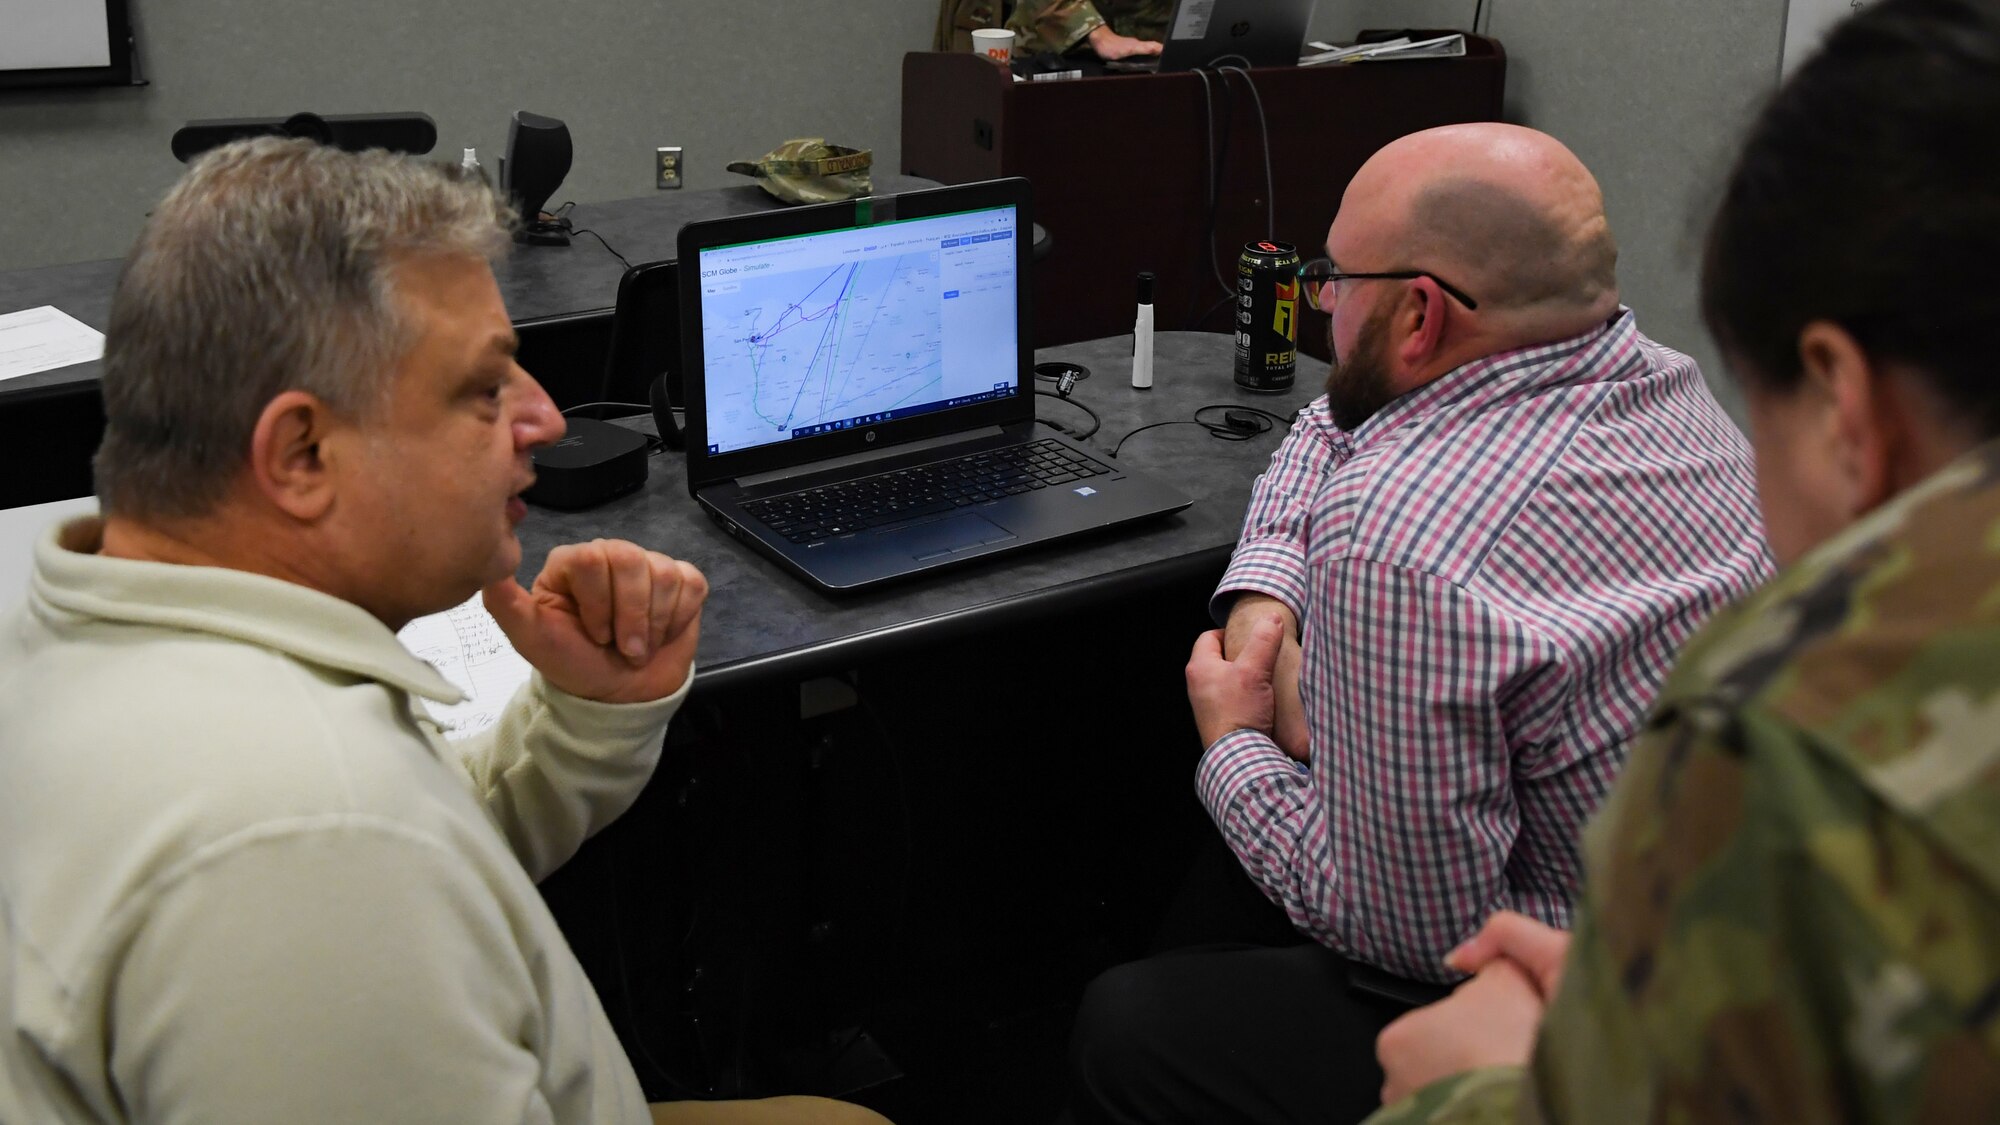 Logistics Readiness Officer Course implements simulation technology